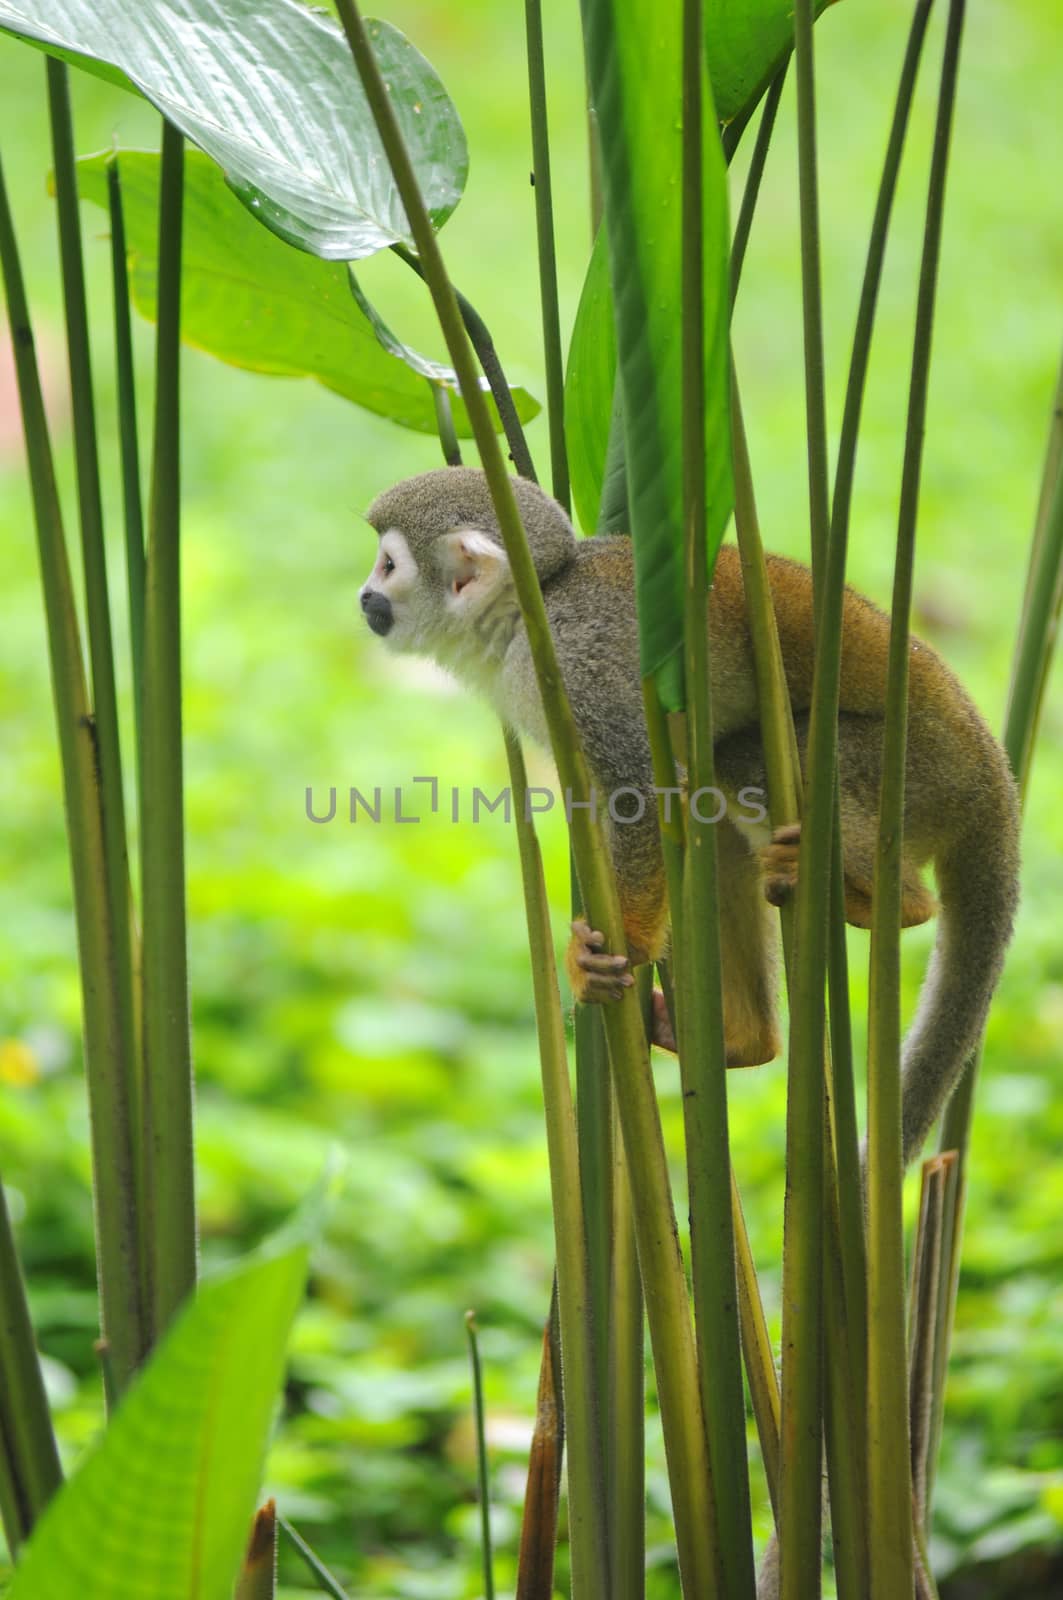 Squirrel Monkey from the jungles of Ecuador
Squirrel monkeys grow to 25 to 35 cm, plus a 35 to 42 cm tail. Male squirrel monkeys weigh 750 to 1100 g. Females weigh 500 to 750 g. Remarkably, the brain mass to body mass ratio for squirrel monkeys is 1:17, which gives them the largest brain, proportionately, of all the primates. Humans have a 1:35 ratio.